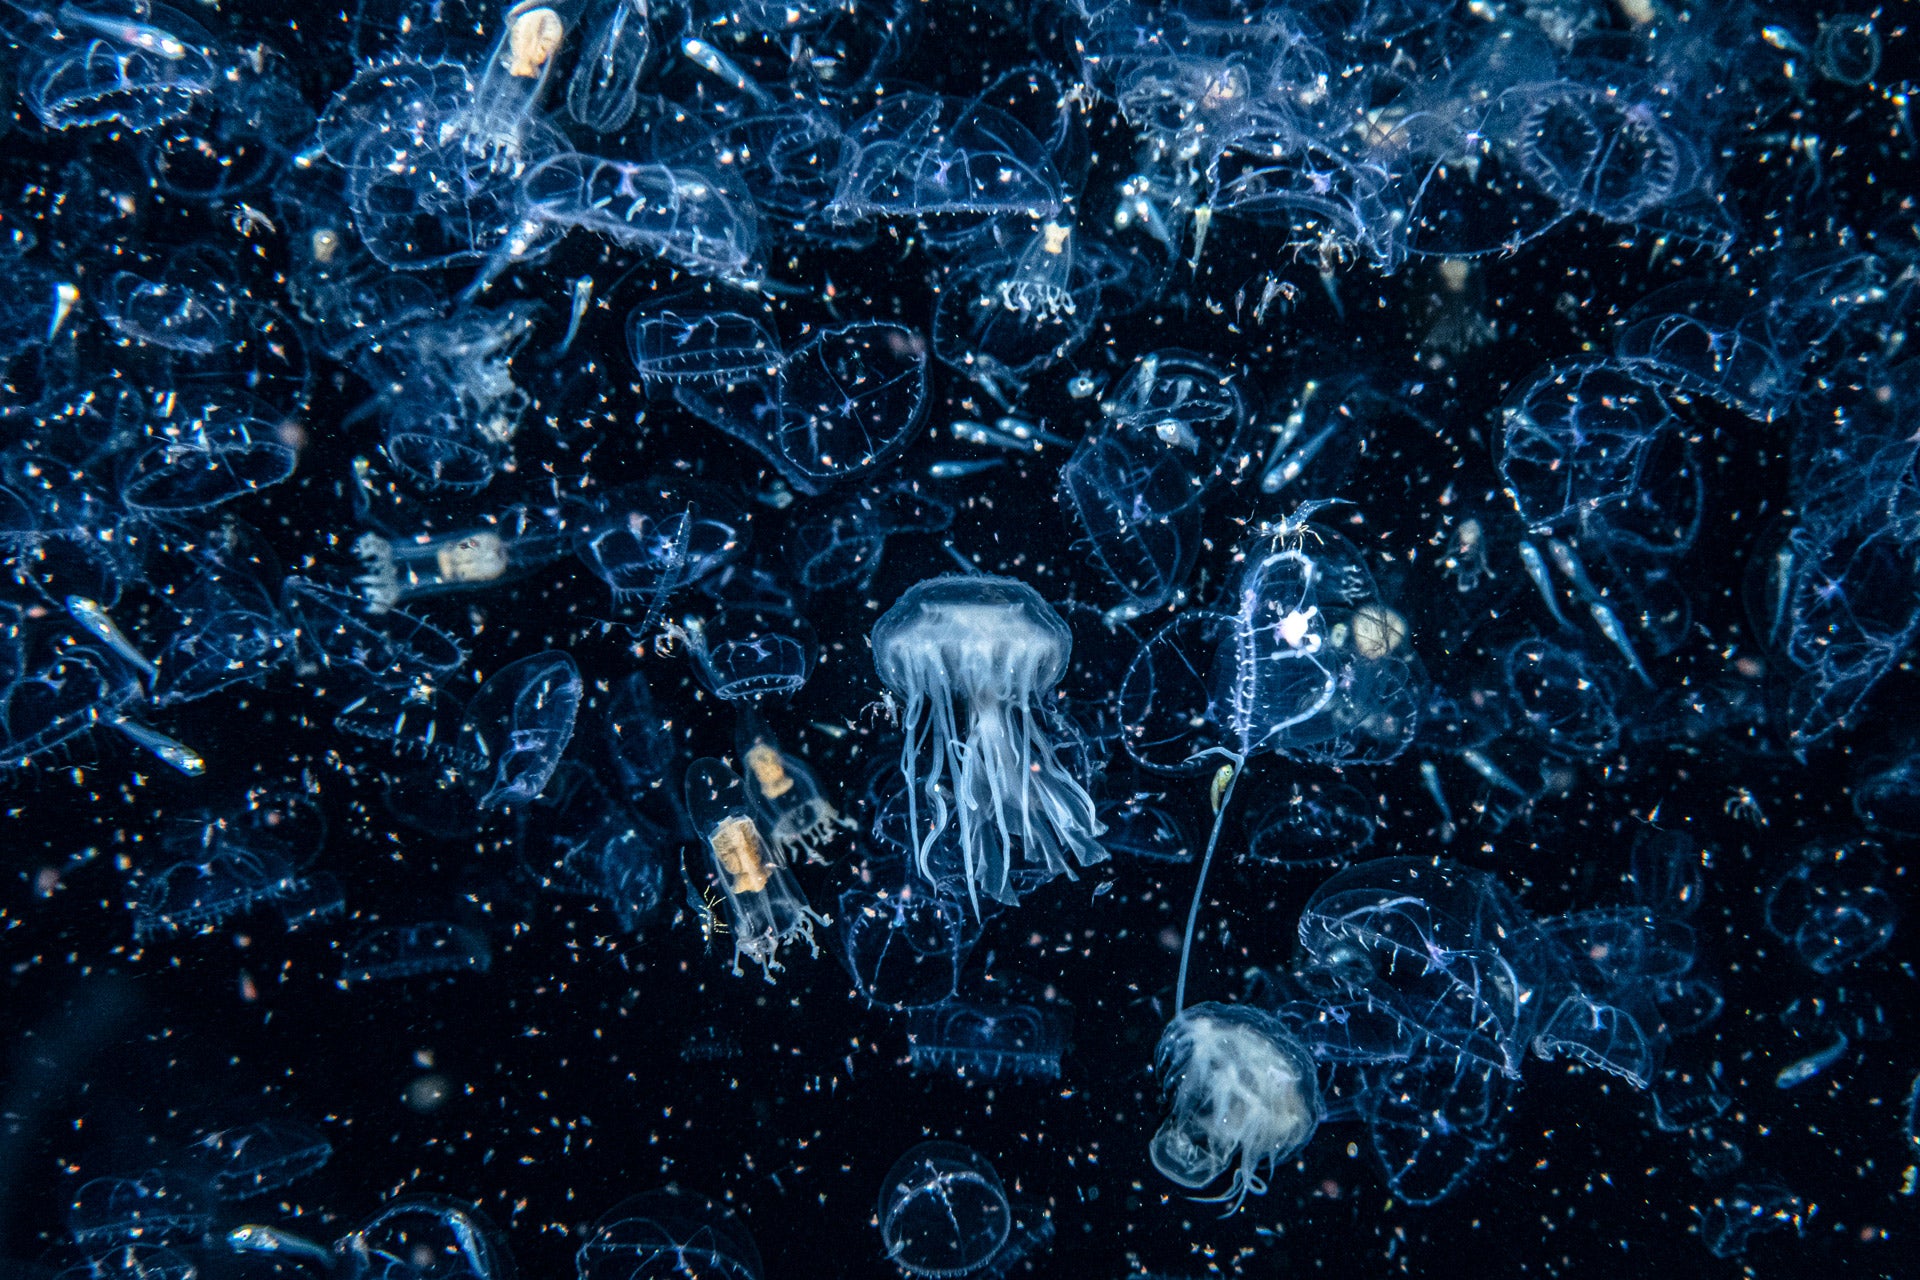 Zooplankton and jellyfish off the coast of Scotland. (Photo: Henley Spiers)